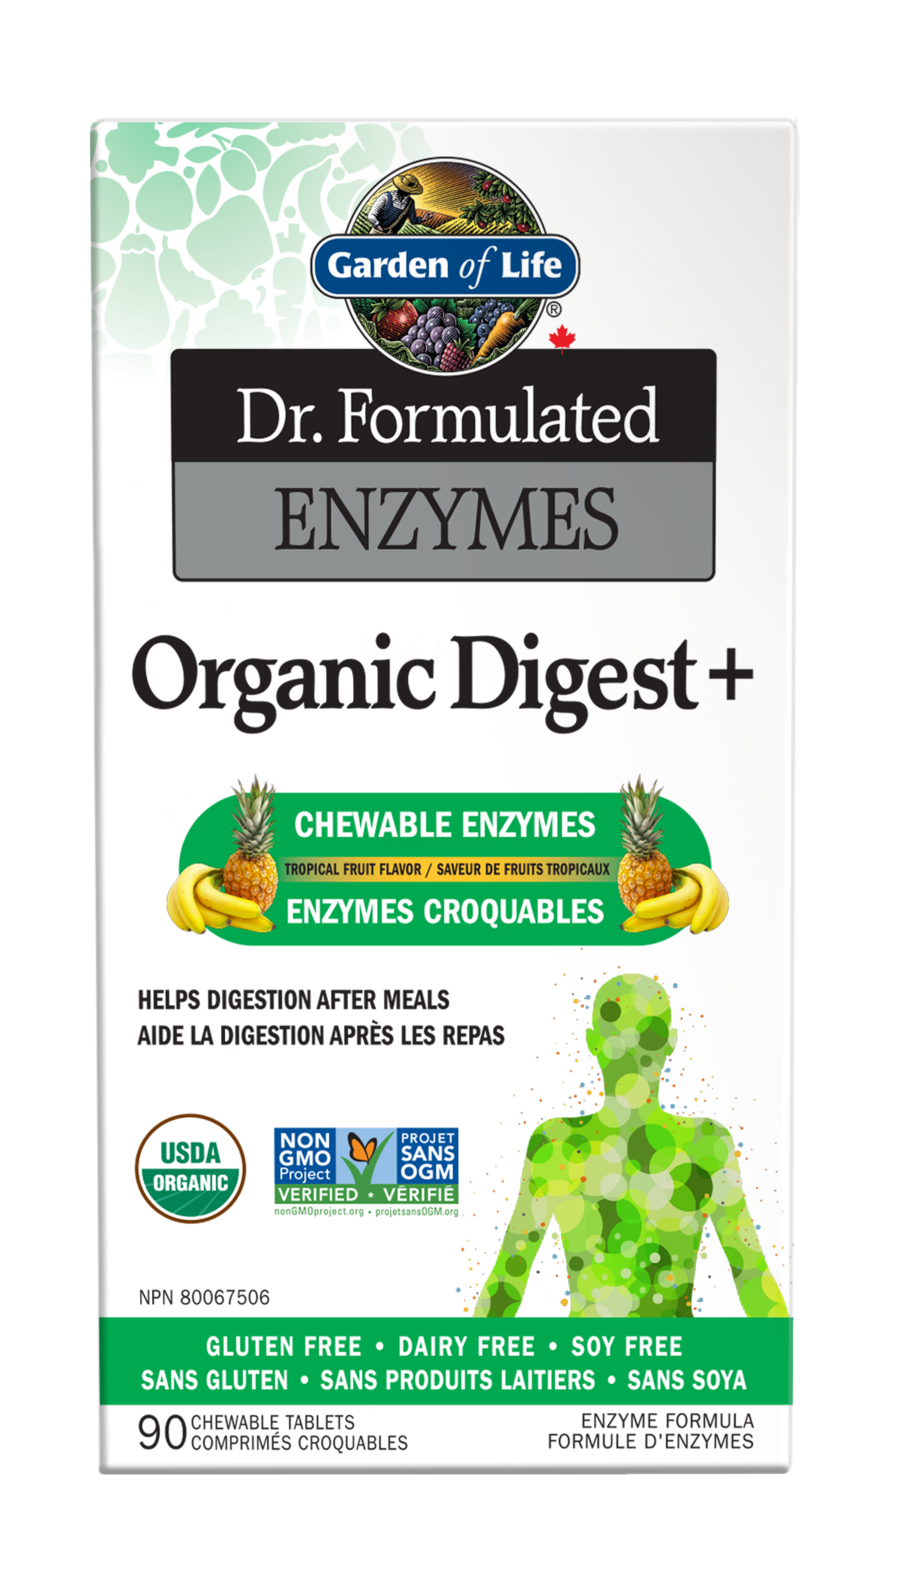 Garden of Life Dr. Formulated Enzymes Organic Digest+ 90 Chewable Tablets